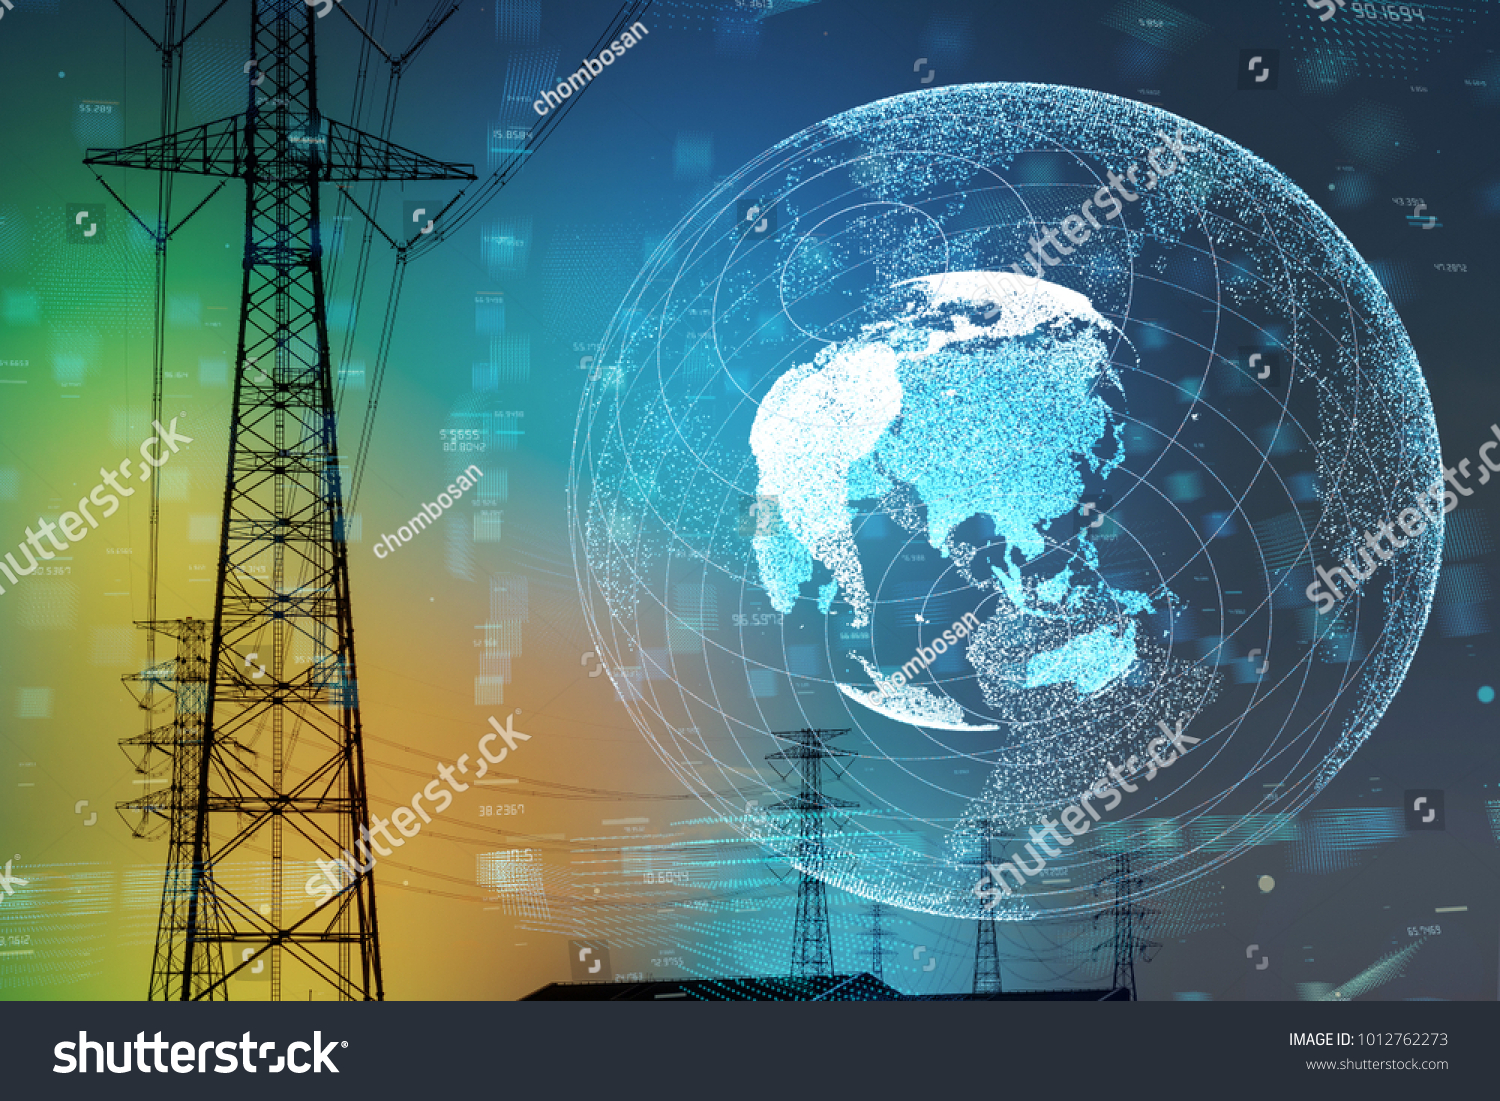 Smart grid and global network concept. #1012762273